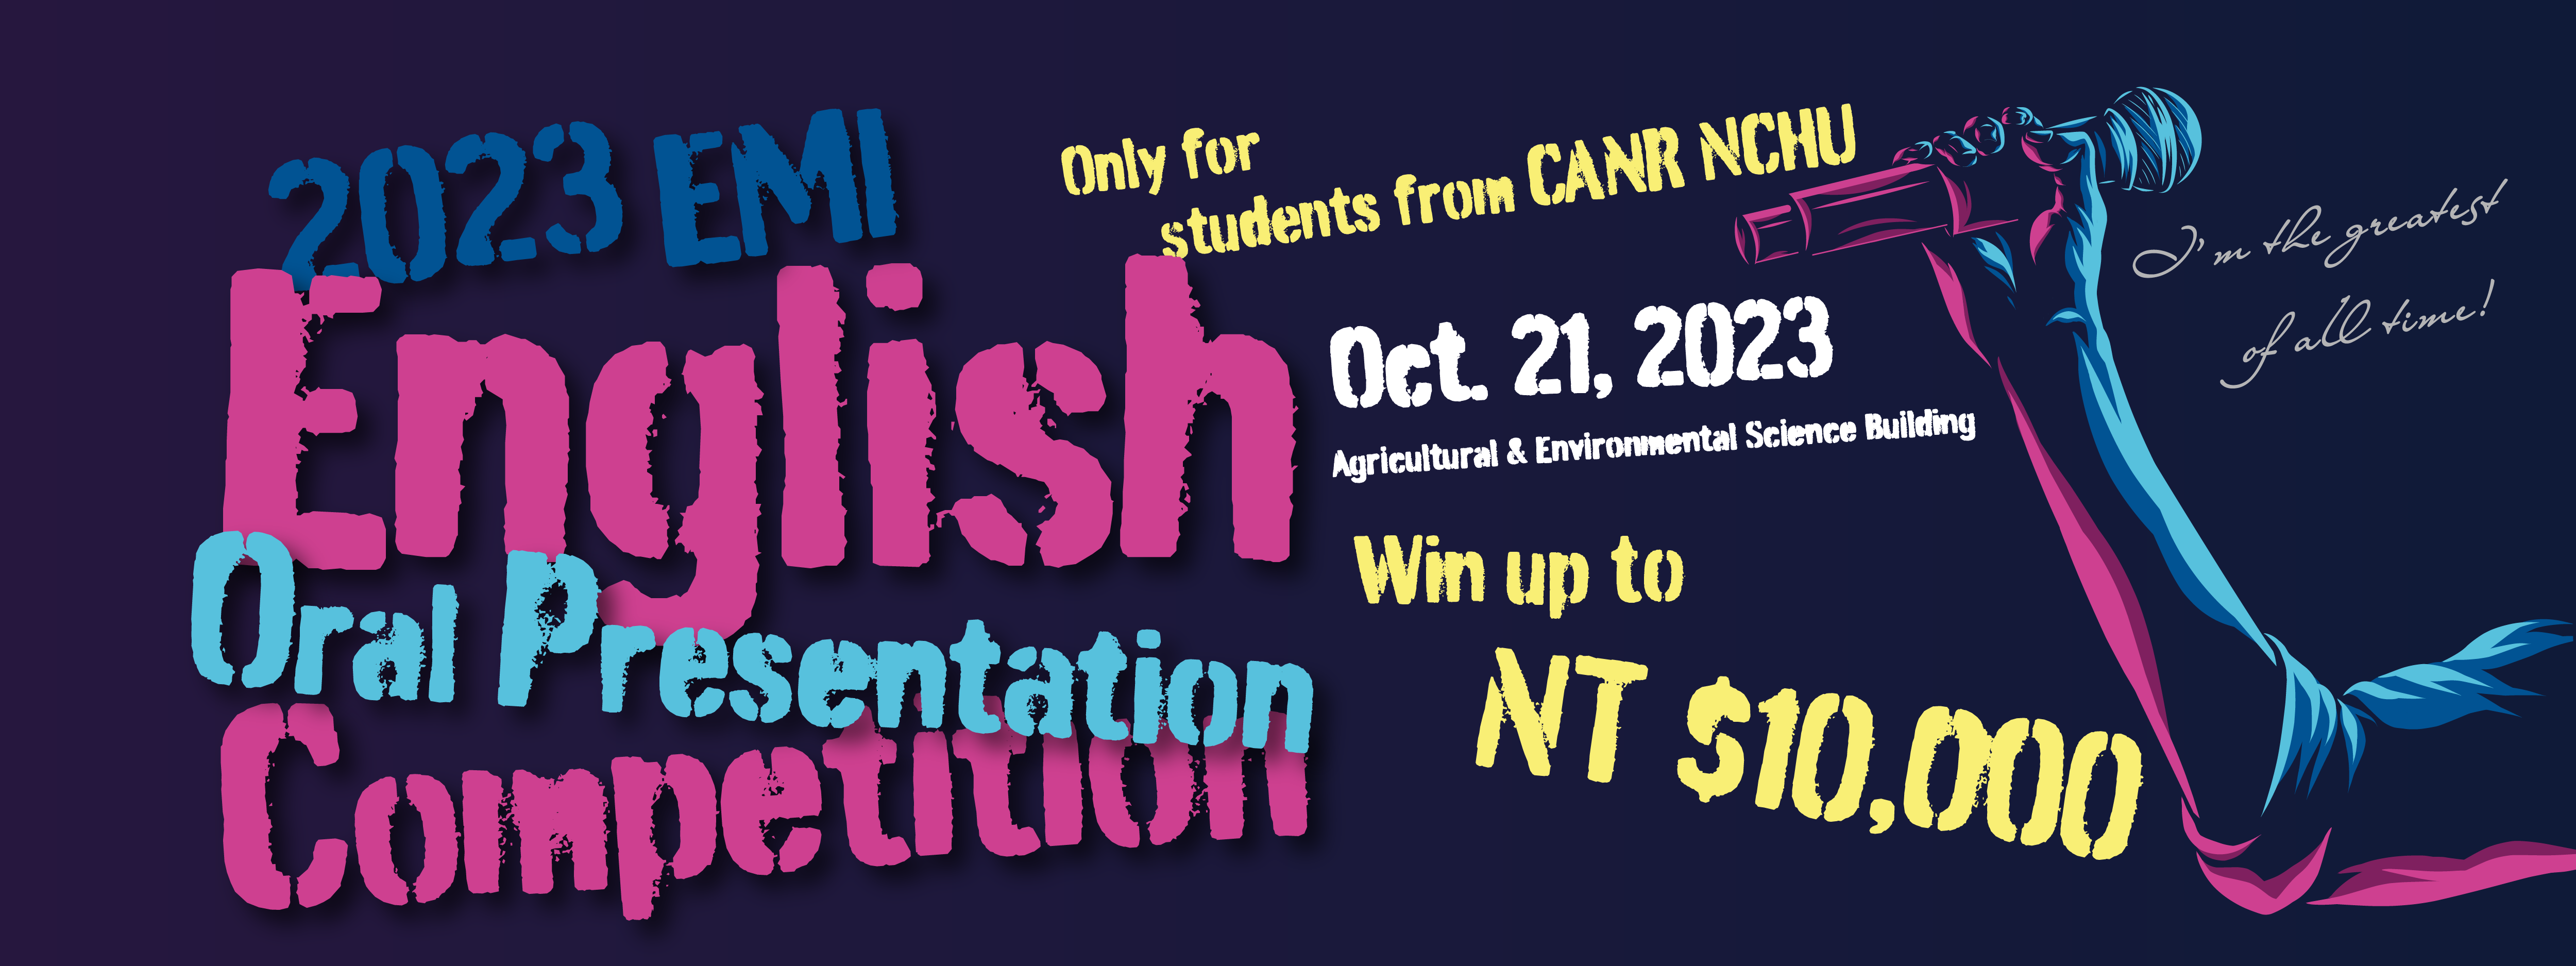 2023 English Oral Presentation Competition 全英文演講及海報競賽 (Sign-up Deadline: 12PM Oct. 13,2023)